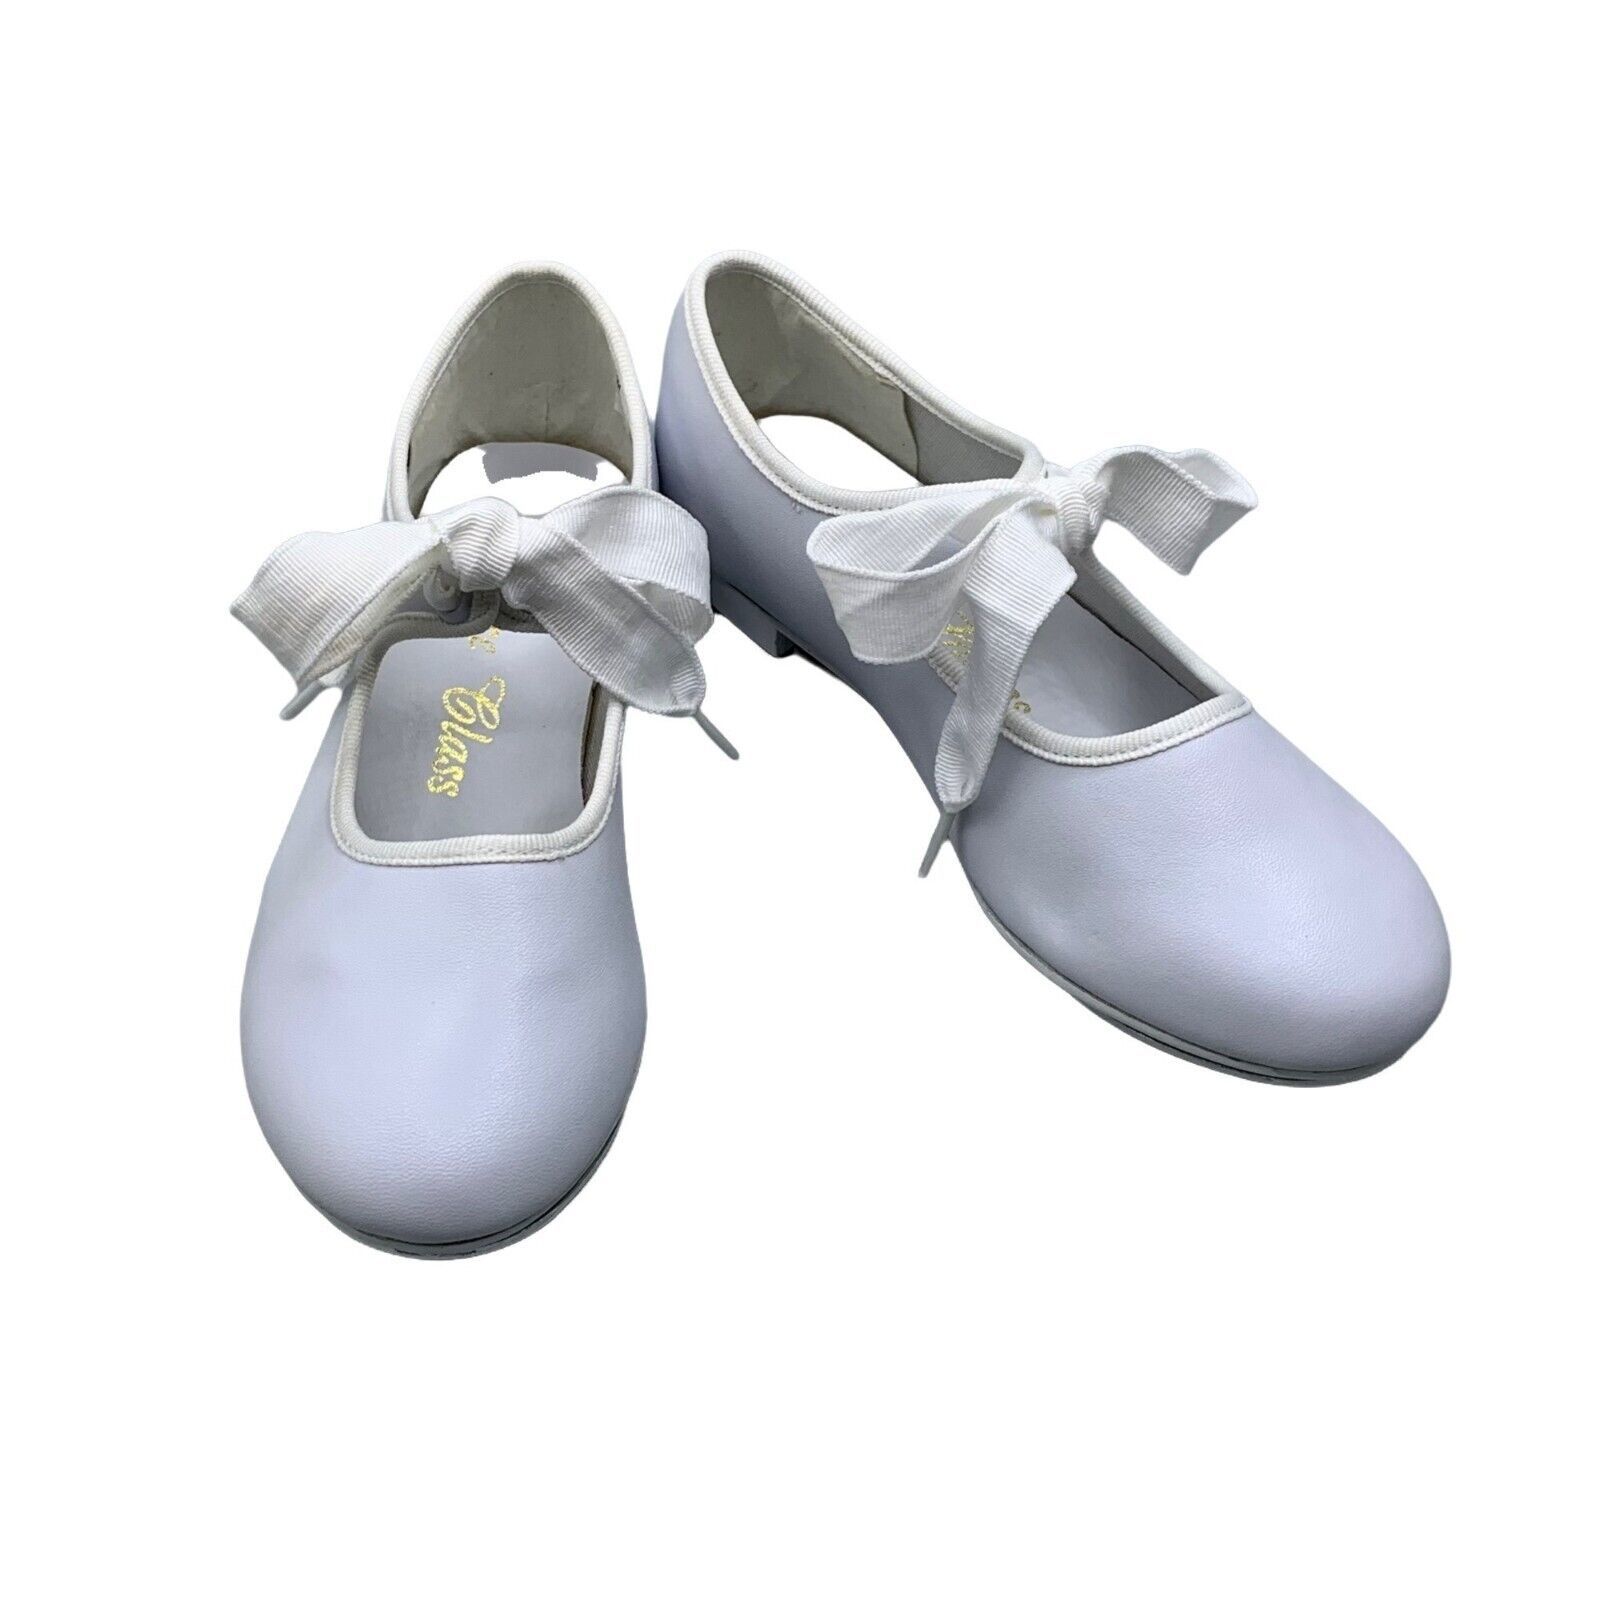 Primary image for Toddlers Bow Tie White Tap Shoes Tyette Size 9.5 Recital Dance Class Leather New